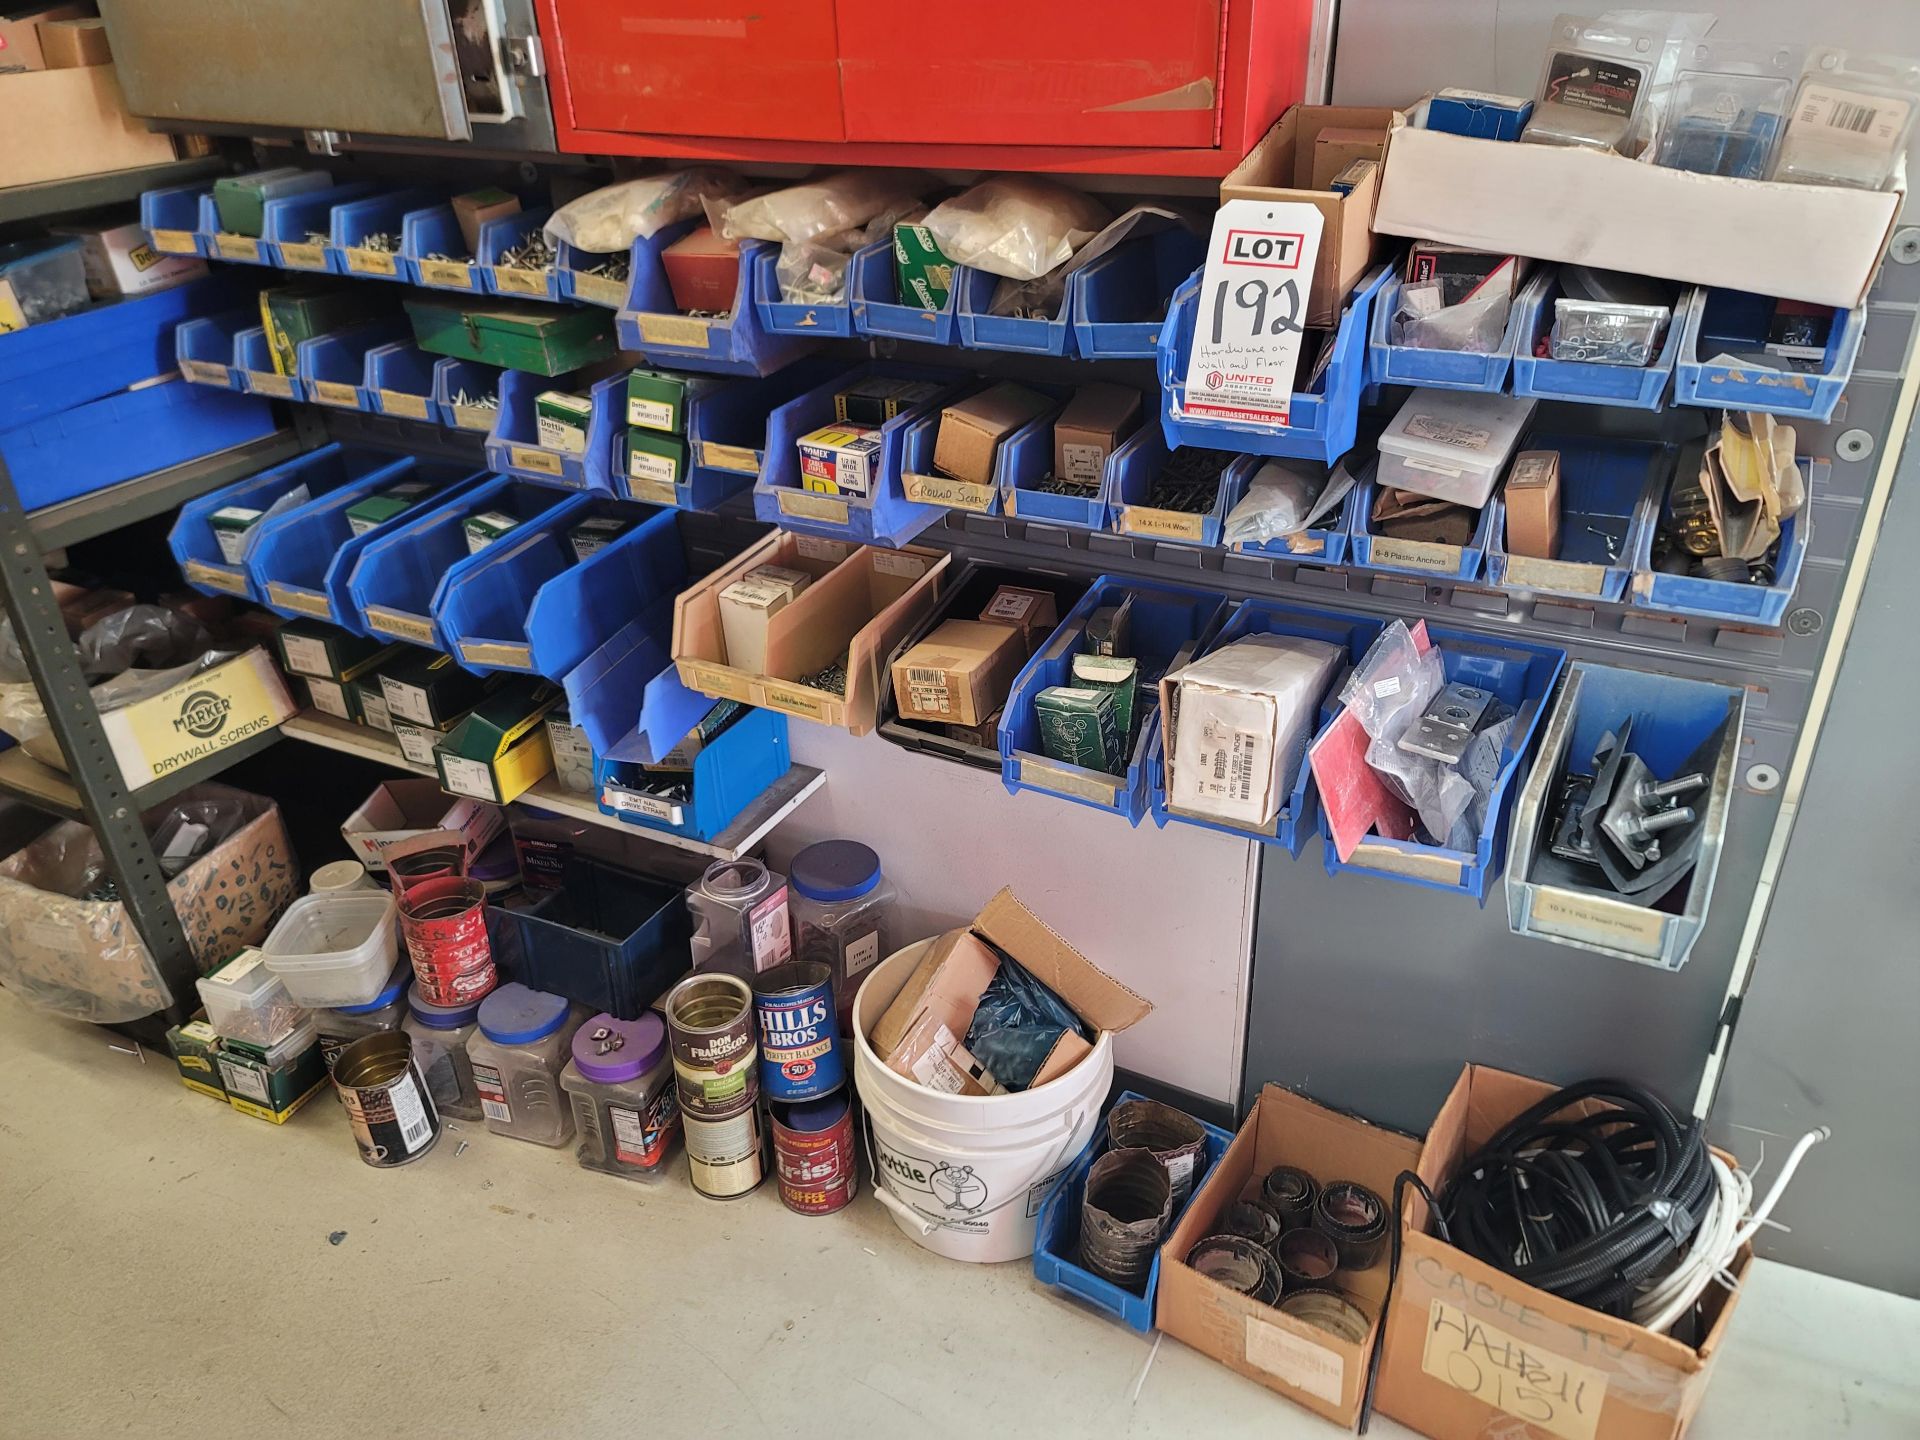 LOT - ASSORTED FASTENERS AND HARDWARE IN PLASTIC BINS AND ON FLOOR